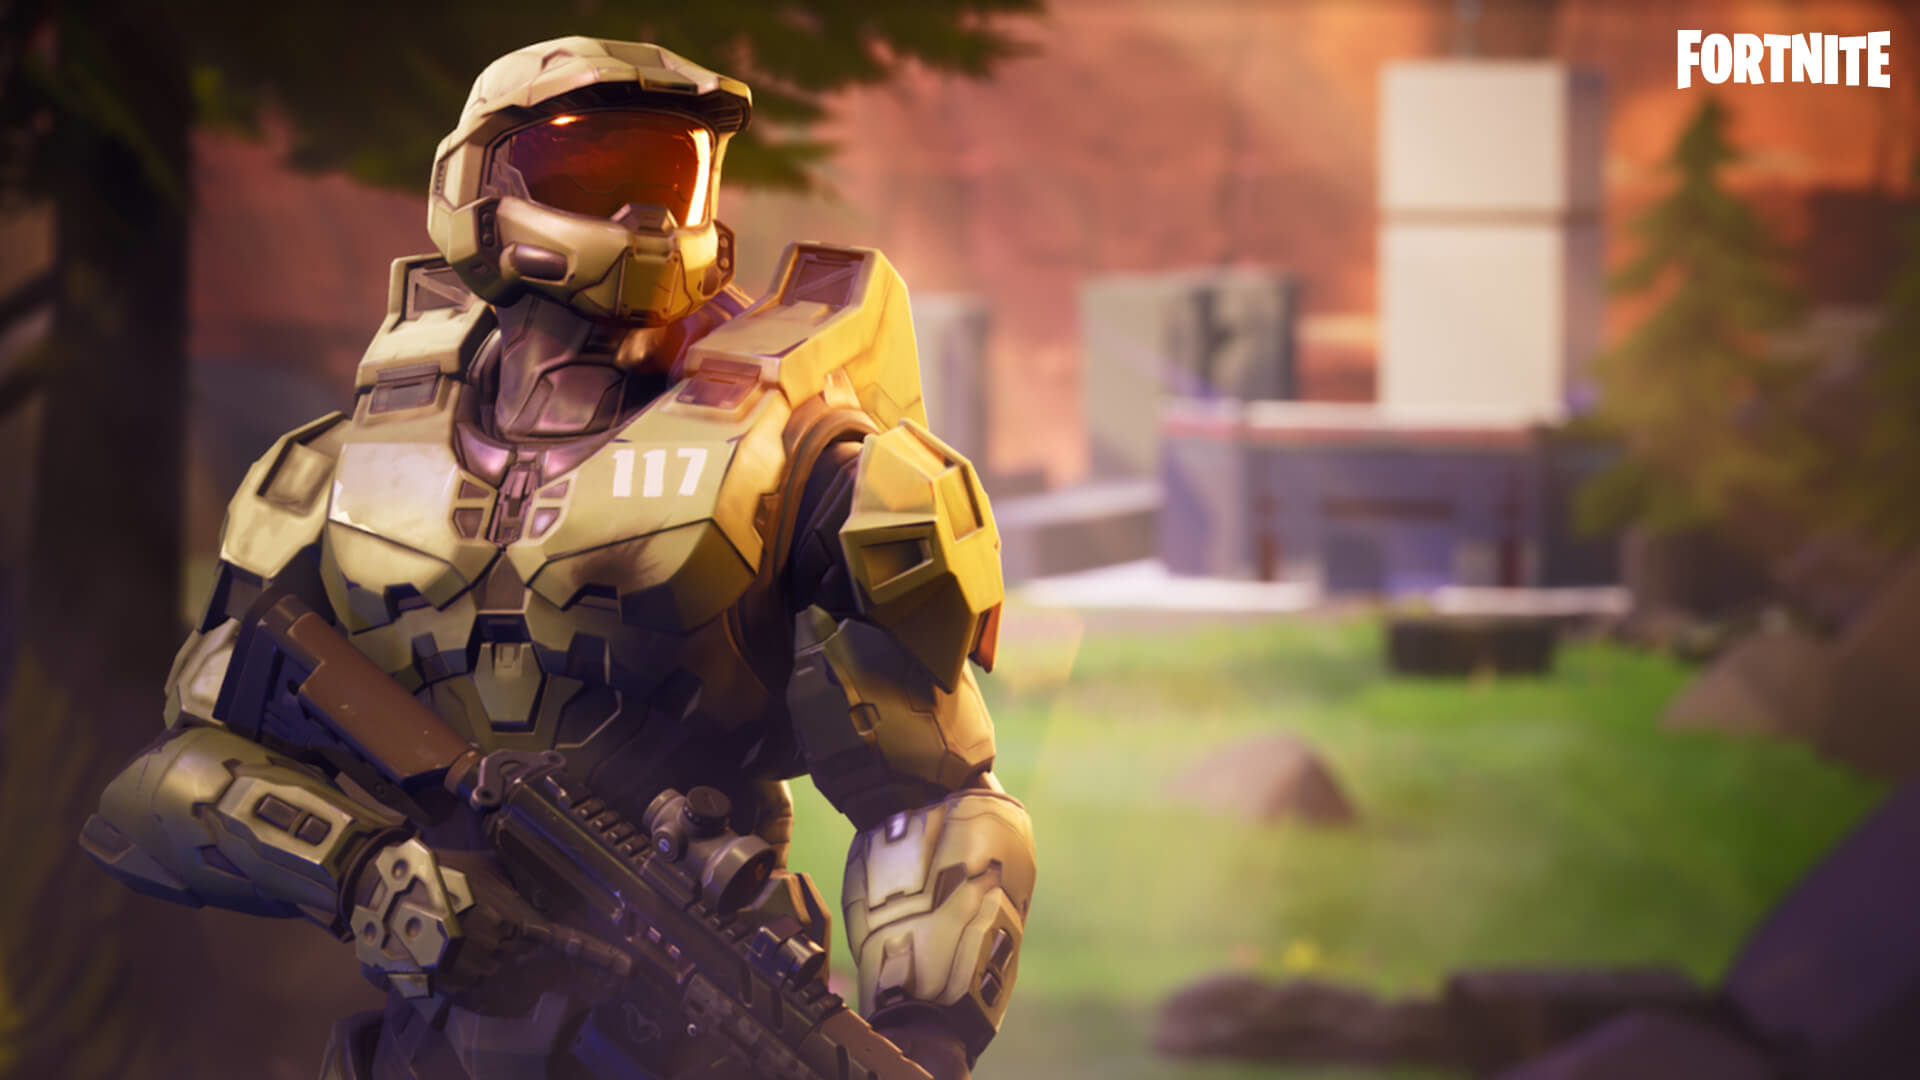 Master Chief Fortnite Wallpaper Fortnite X Master Chief Halo Wallpaper Hd Games 4k Wallpapers Images Photos And Background Wallpapers Den